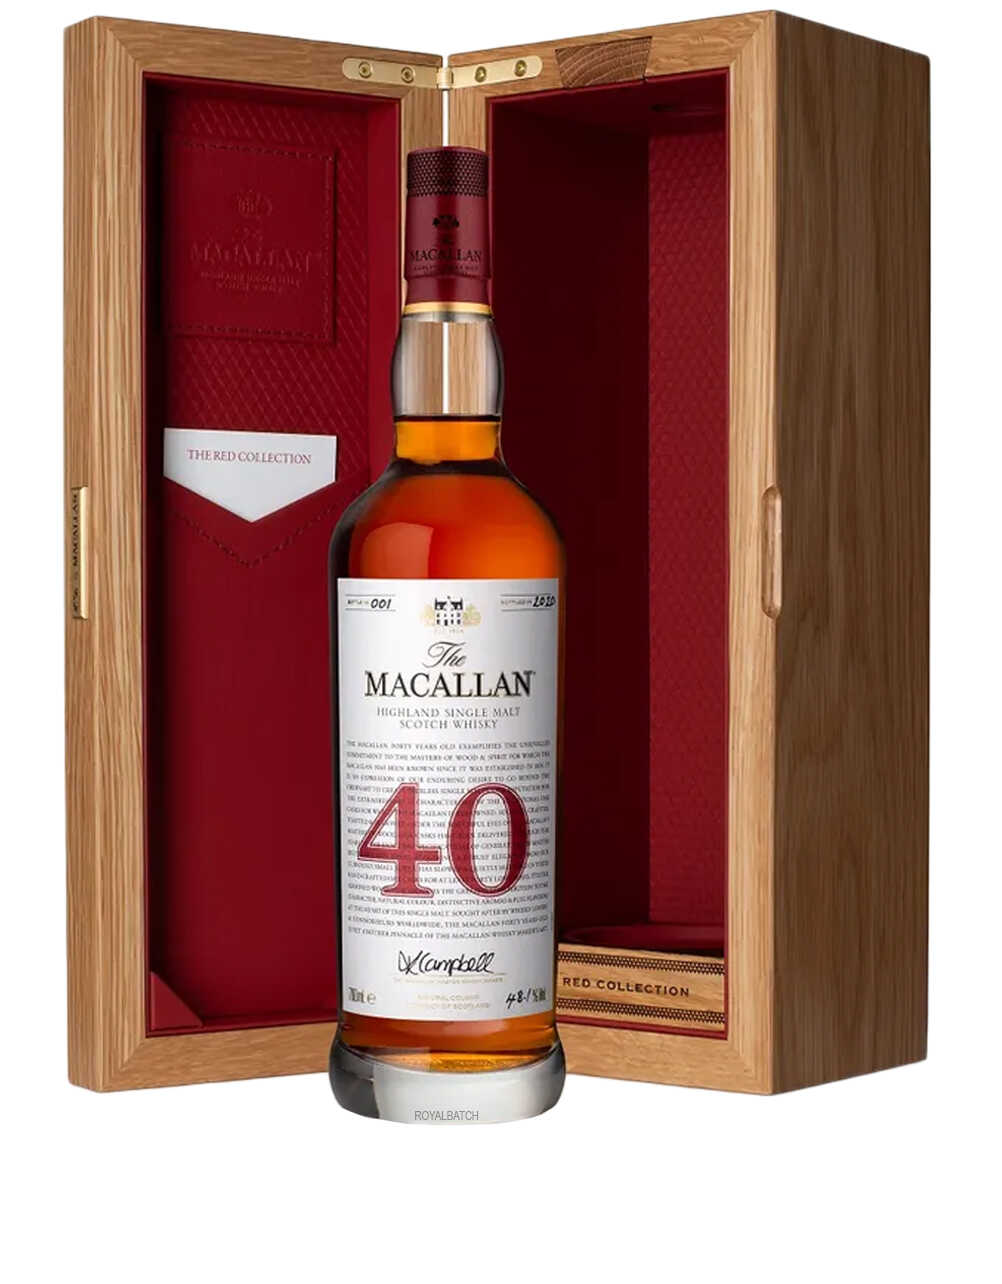 The Macallan Red Collection 40 Year Old Single Malt Scotch Whisky